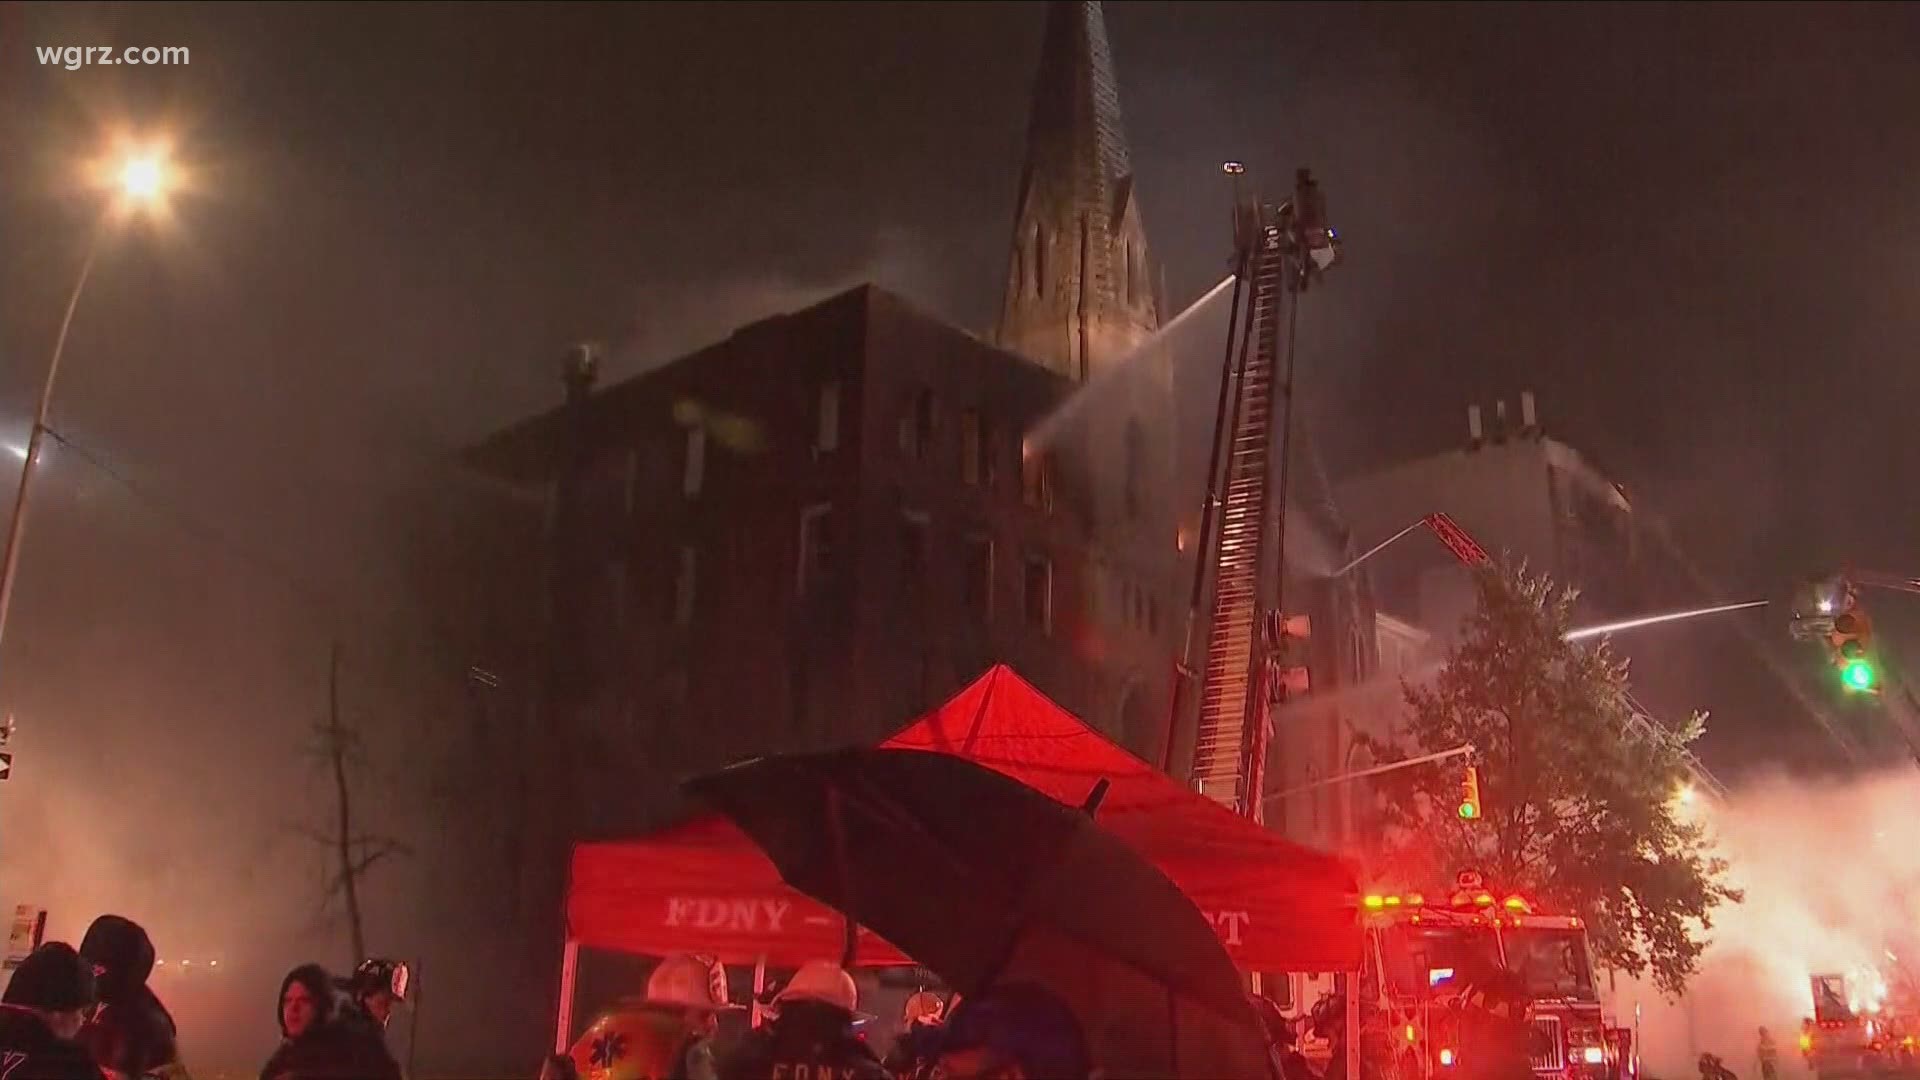 The fire tore through a vacant building early Saturday morning then spread to Middle Collegiate Church in the East Village, which was constructed in 1892.